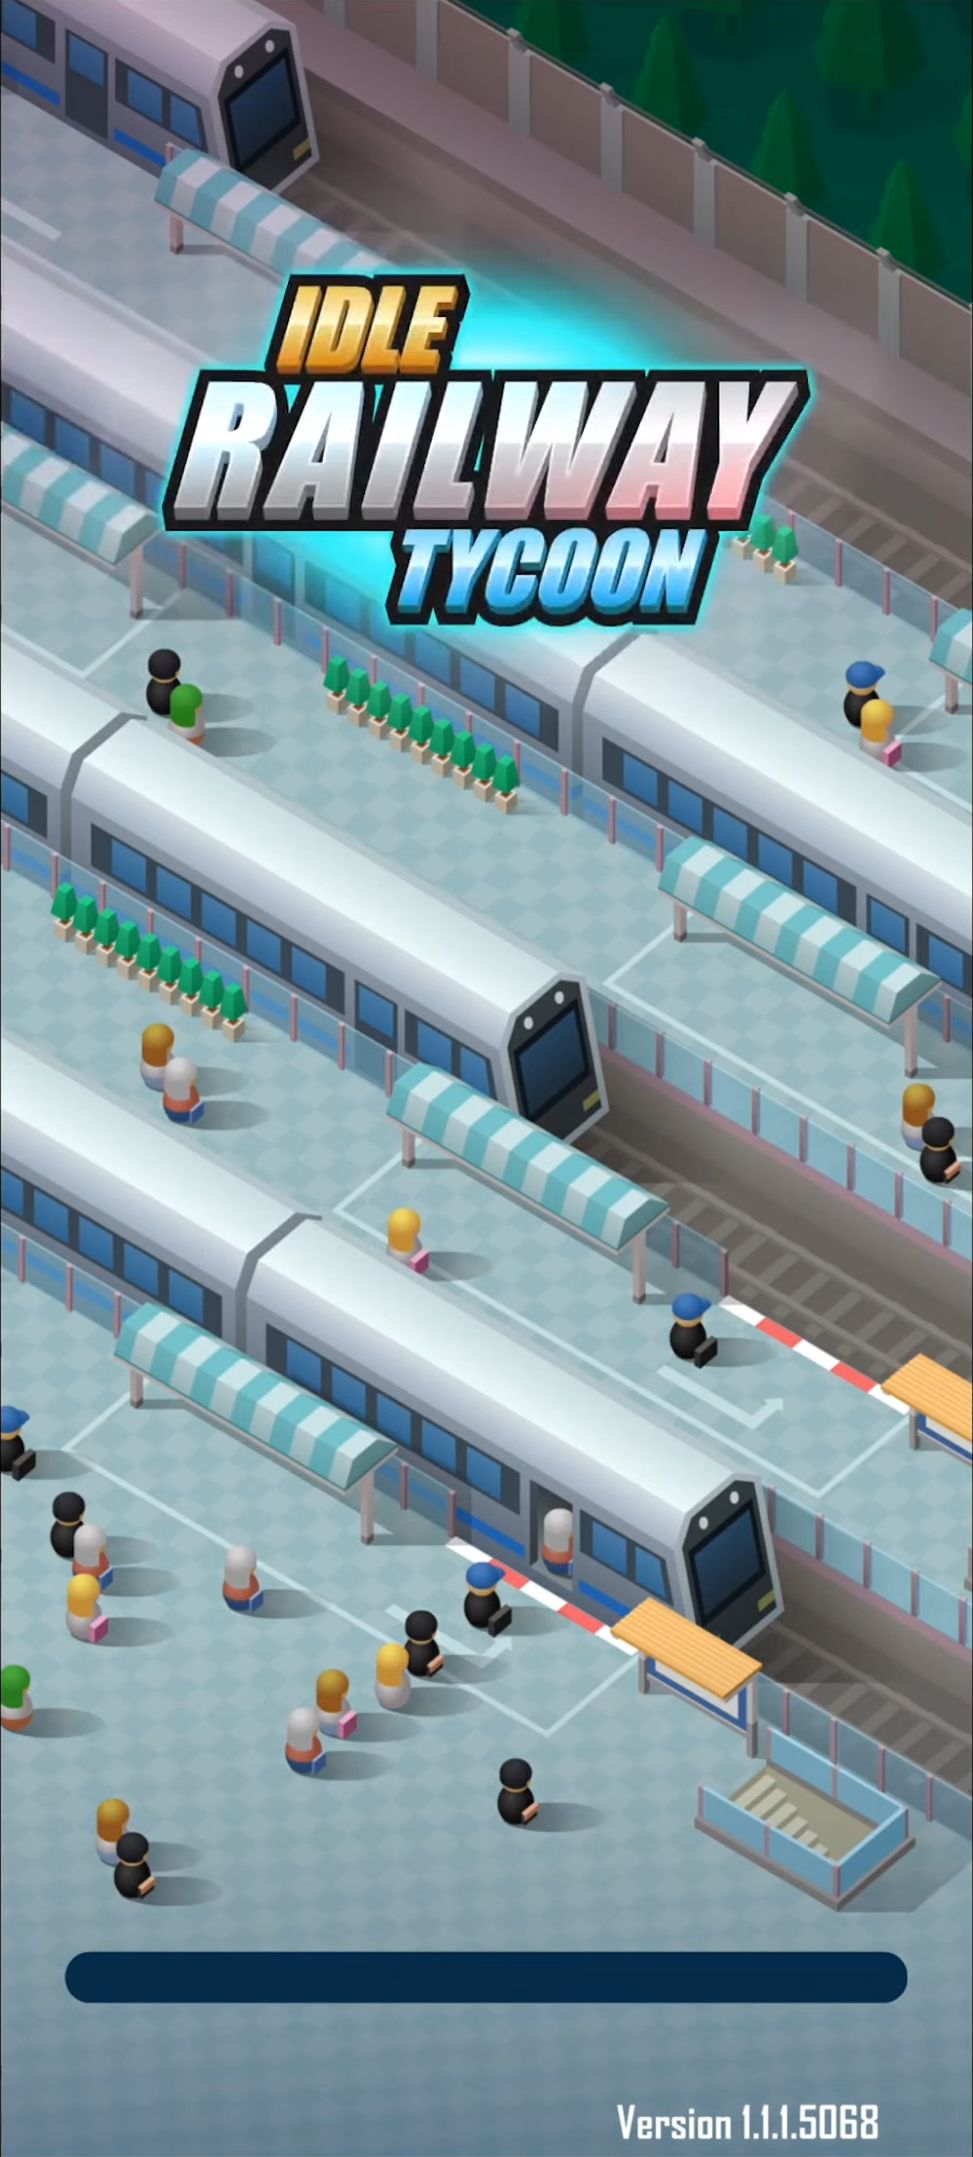 Full version of Android Easy game apk Idle Railway Tycoon for tablet and phone.